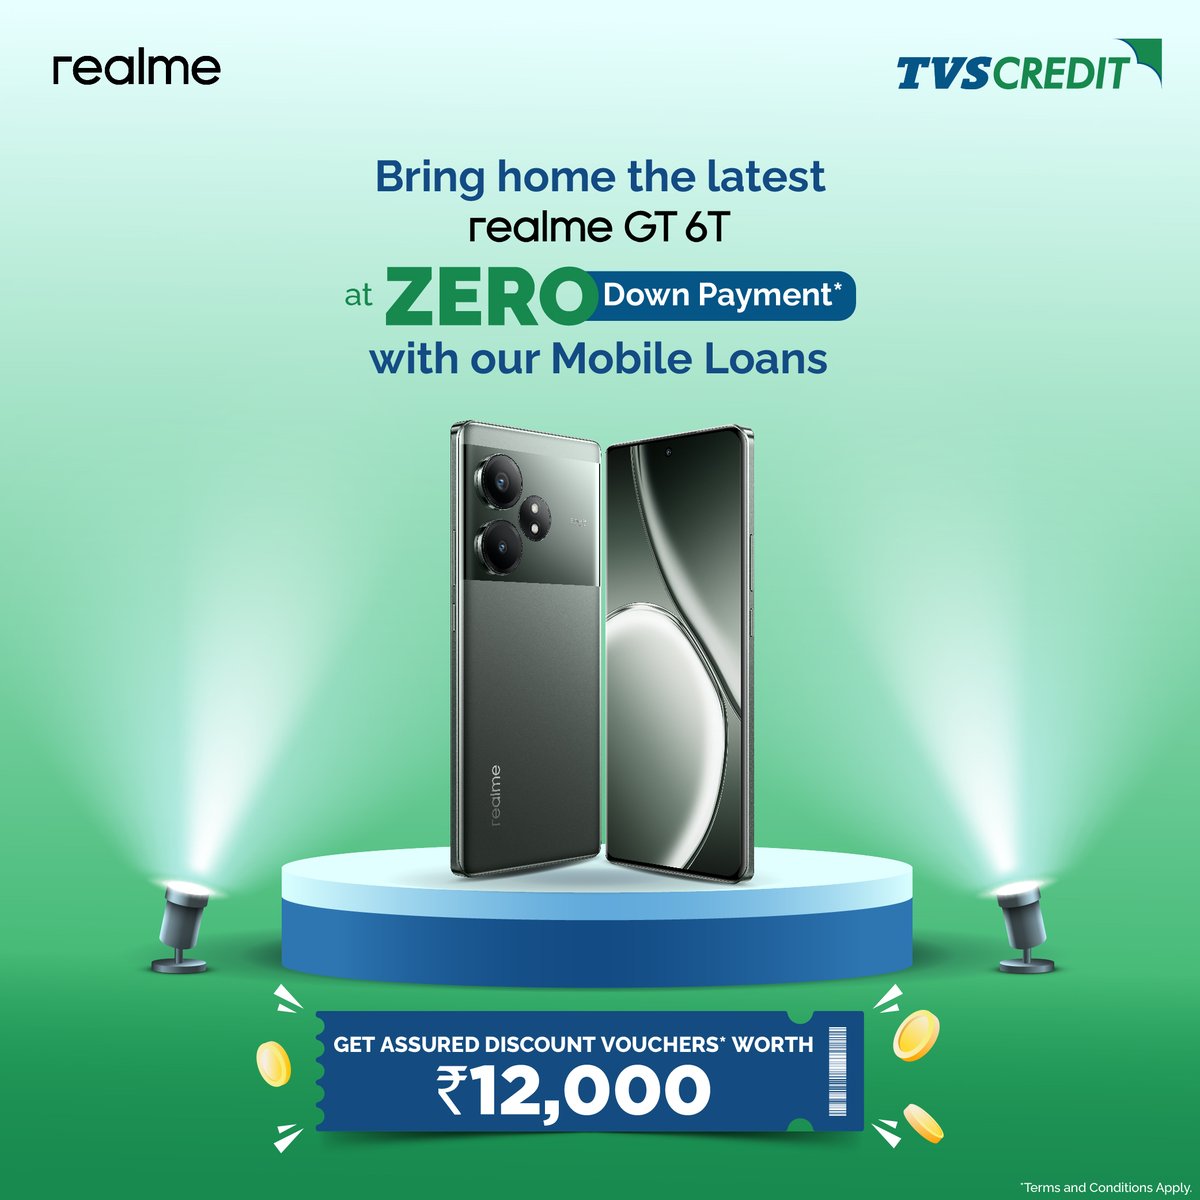 Experience the pinnacle of smartphone technology with the latest Realme GT 6T! Purchase now with zero down payment and EMIs starting from just Rs. 1348*. Enjoy guaranteed discount vouchers worth Rs. 12,000*!

Grab this incredible offer with our #MobileLoans today! Offer is valid